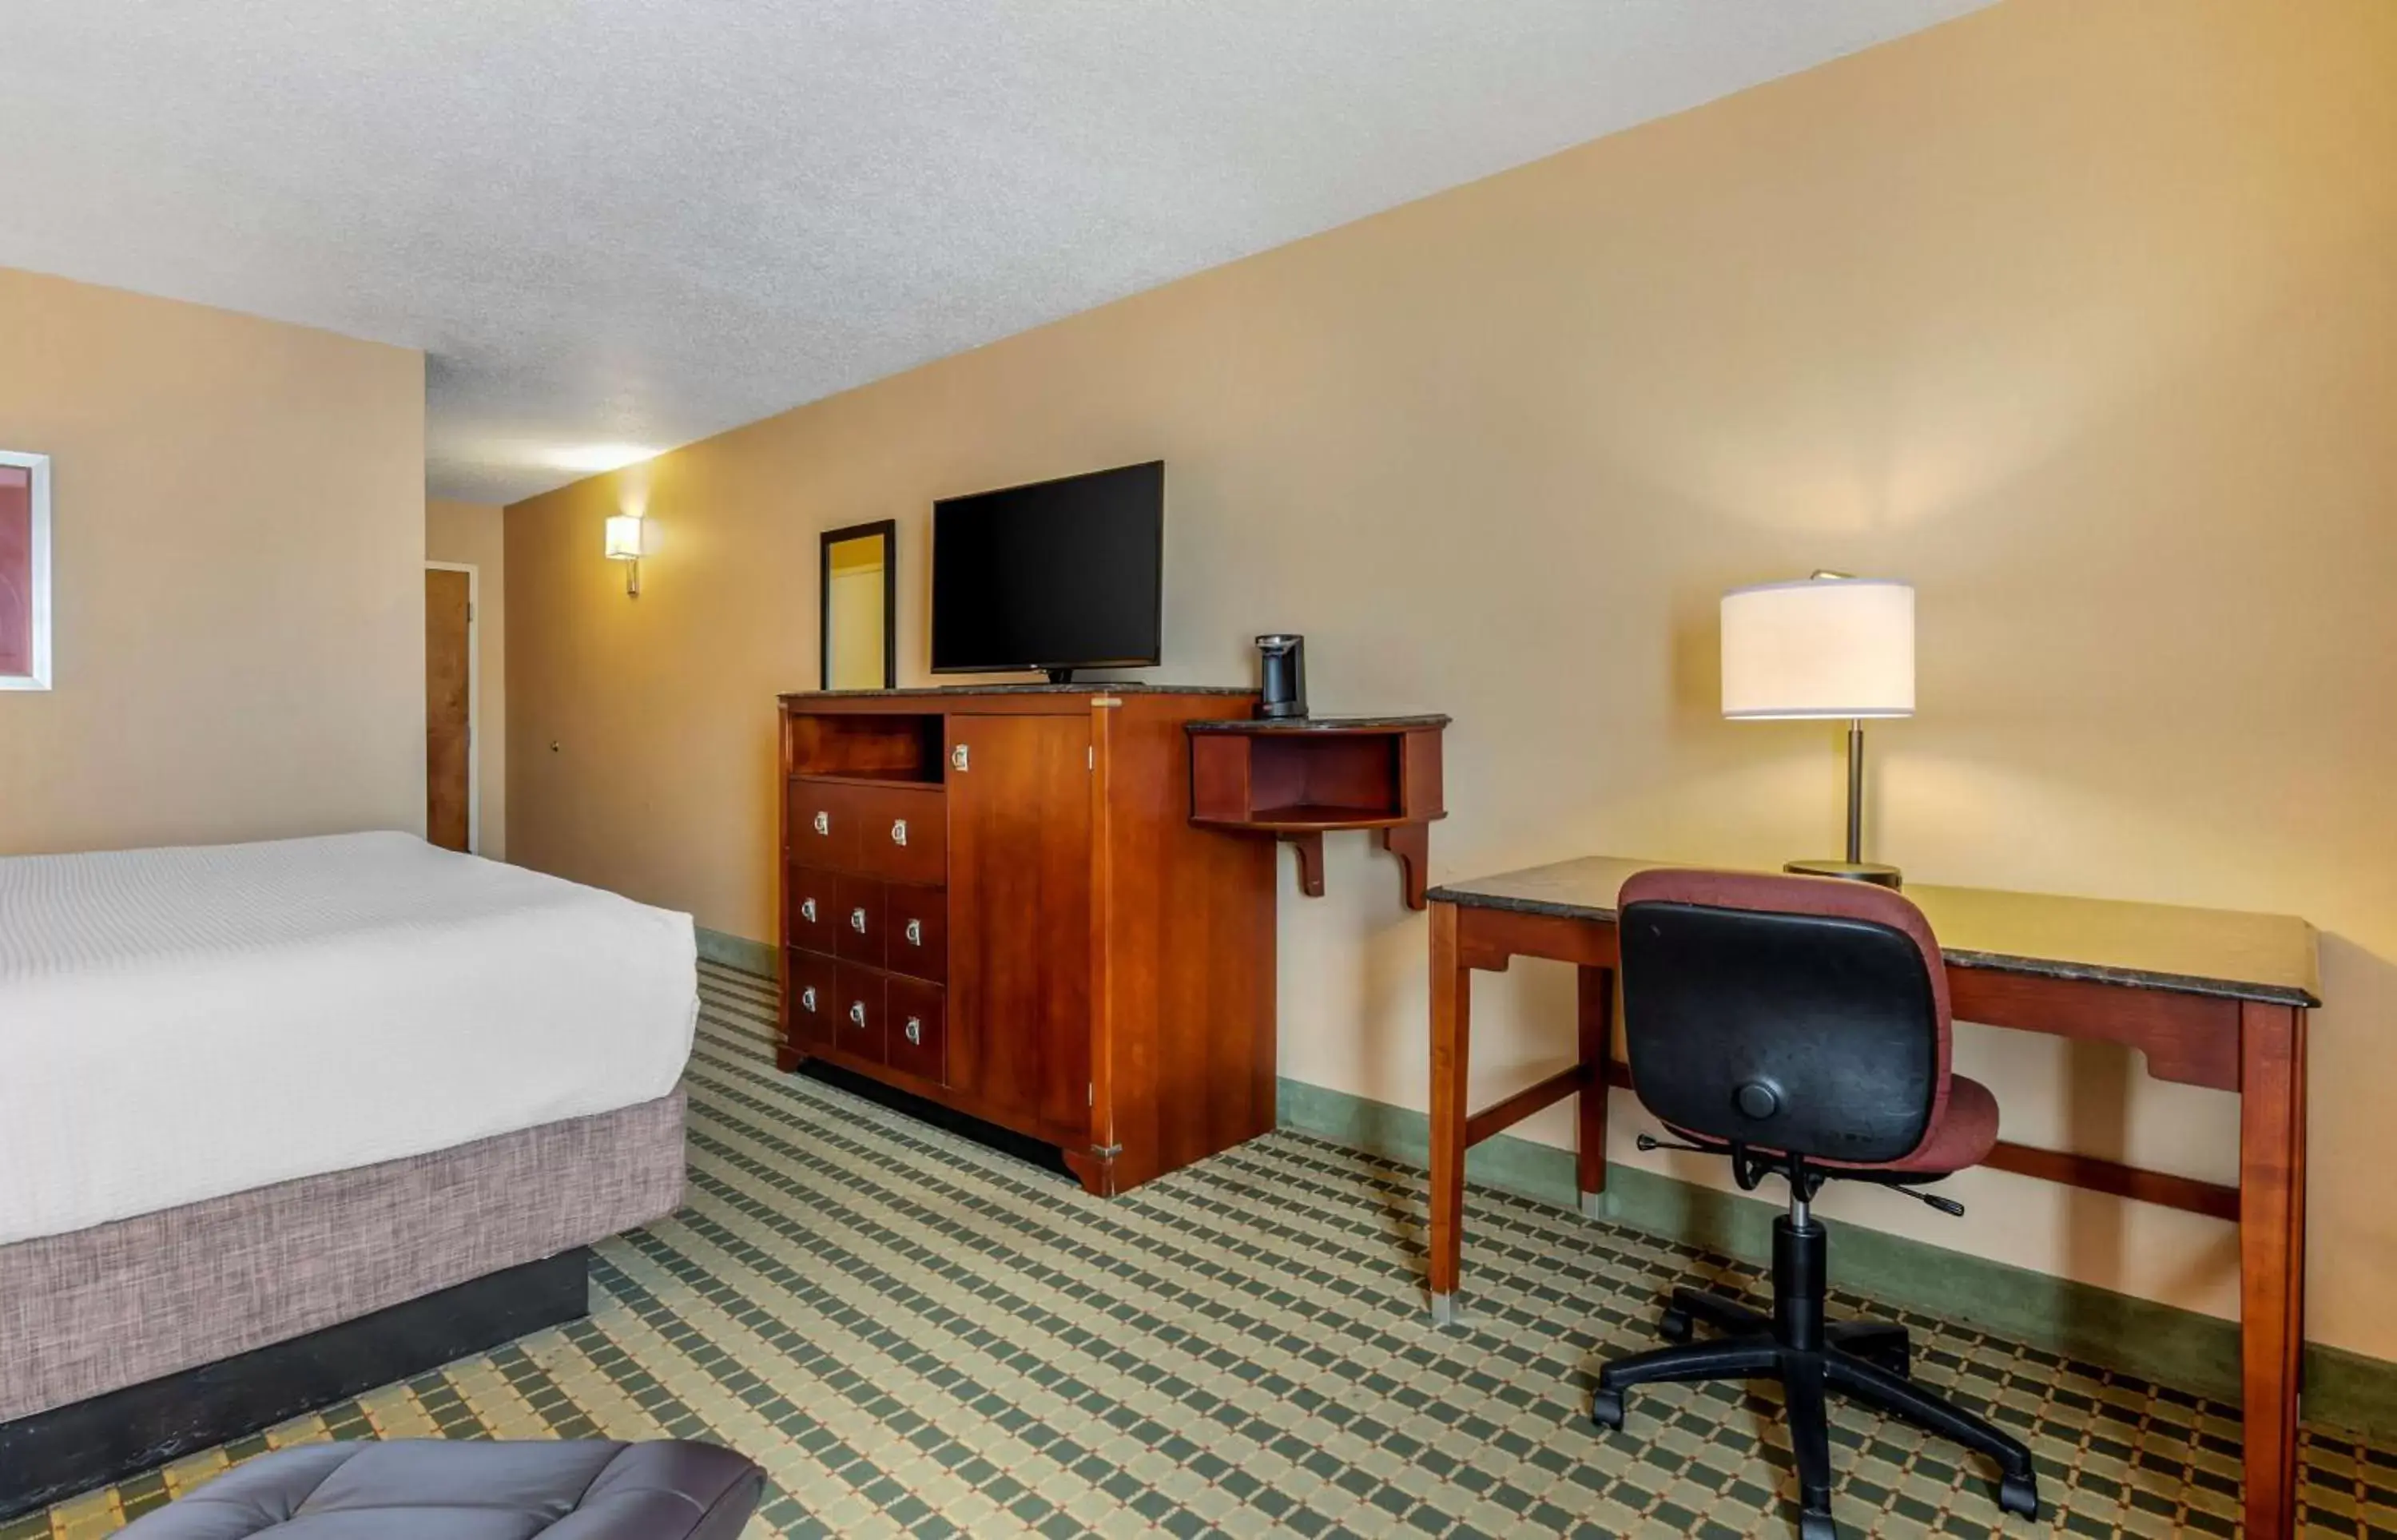 Bedroom, TV/Entertainment Center in BEST WESTERN PLUS Inn at Valley View